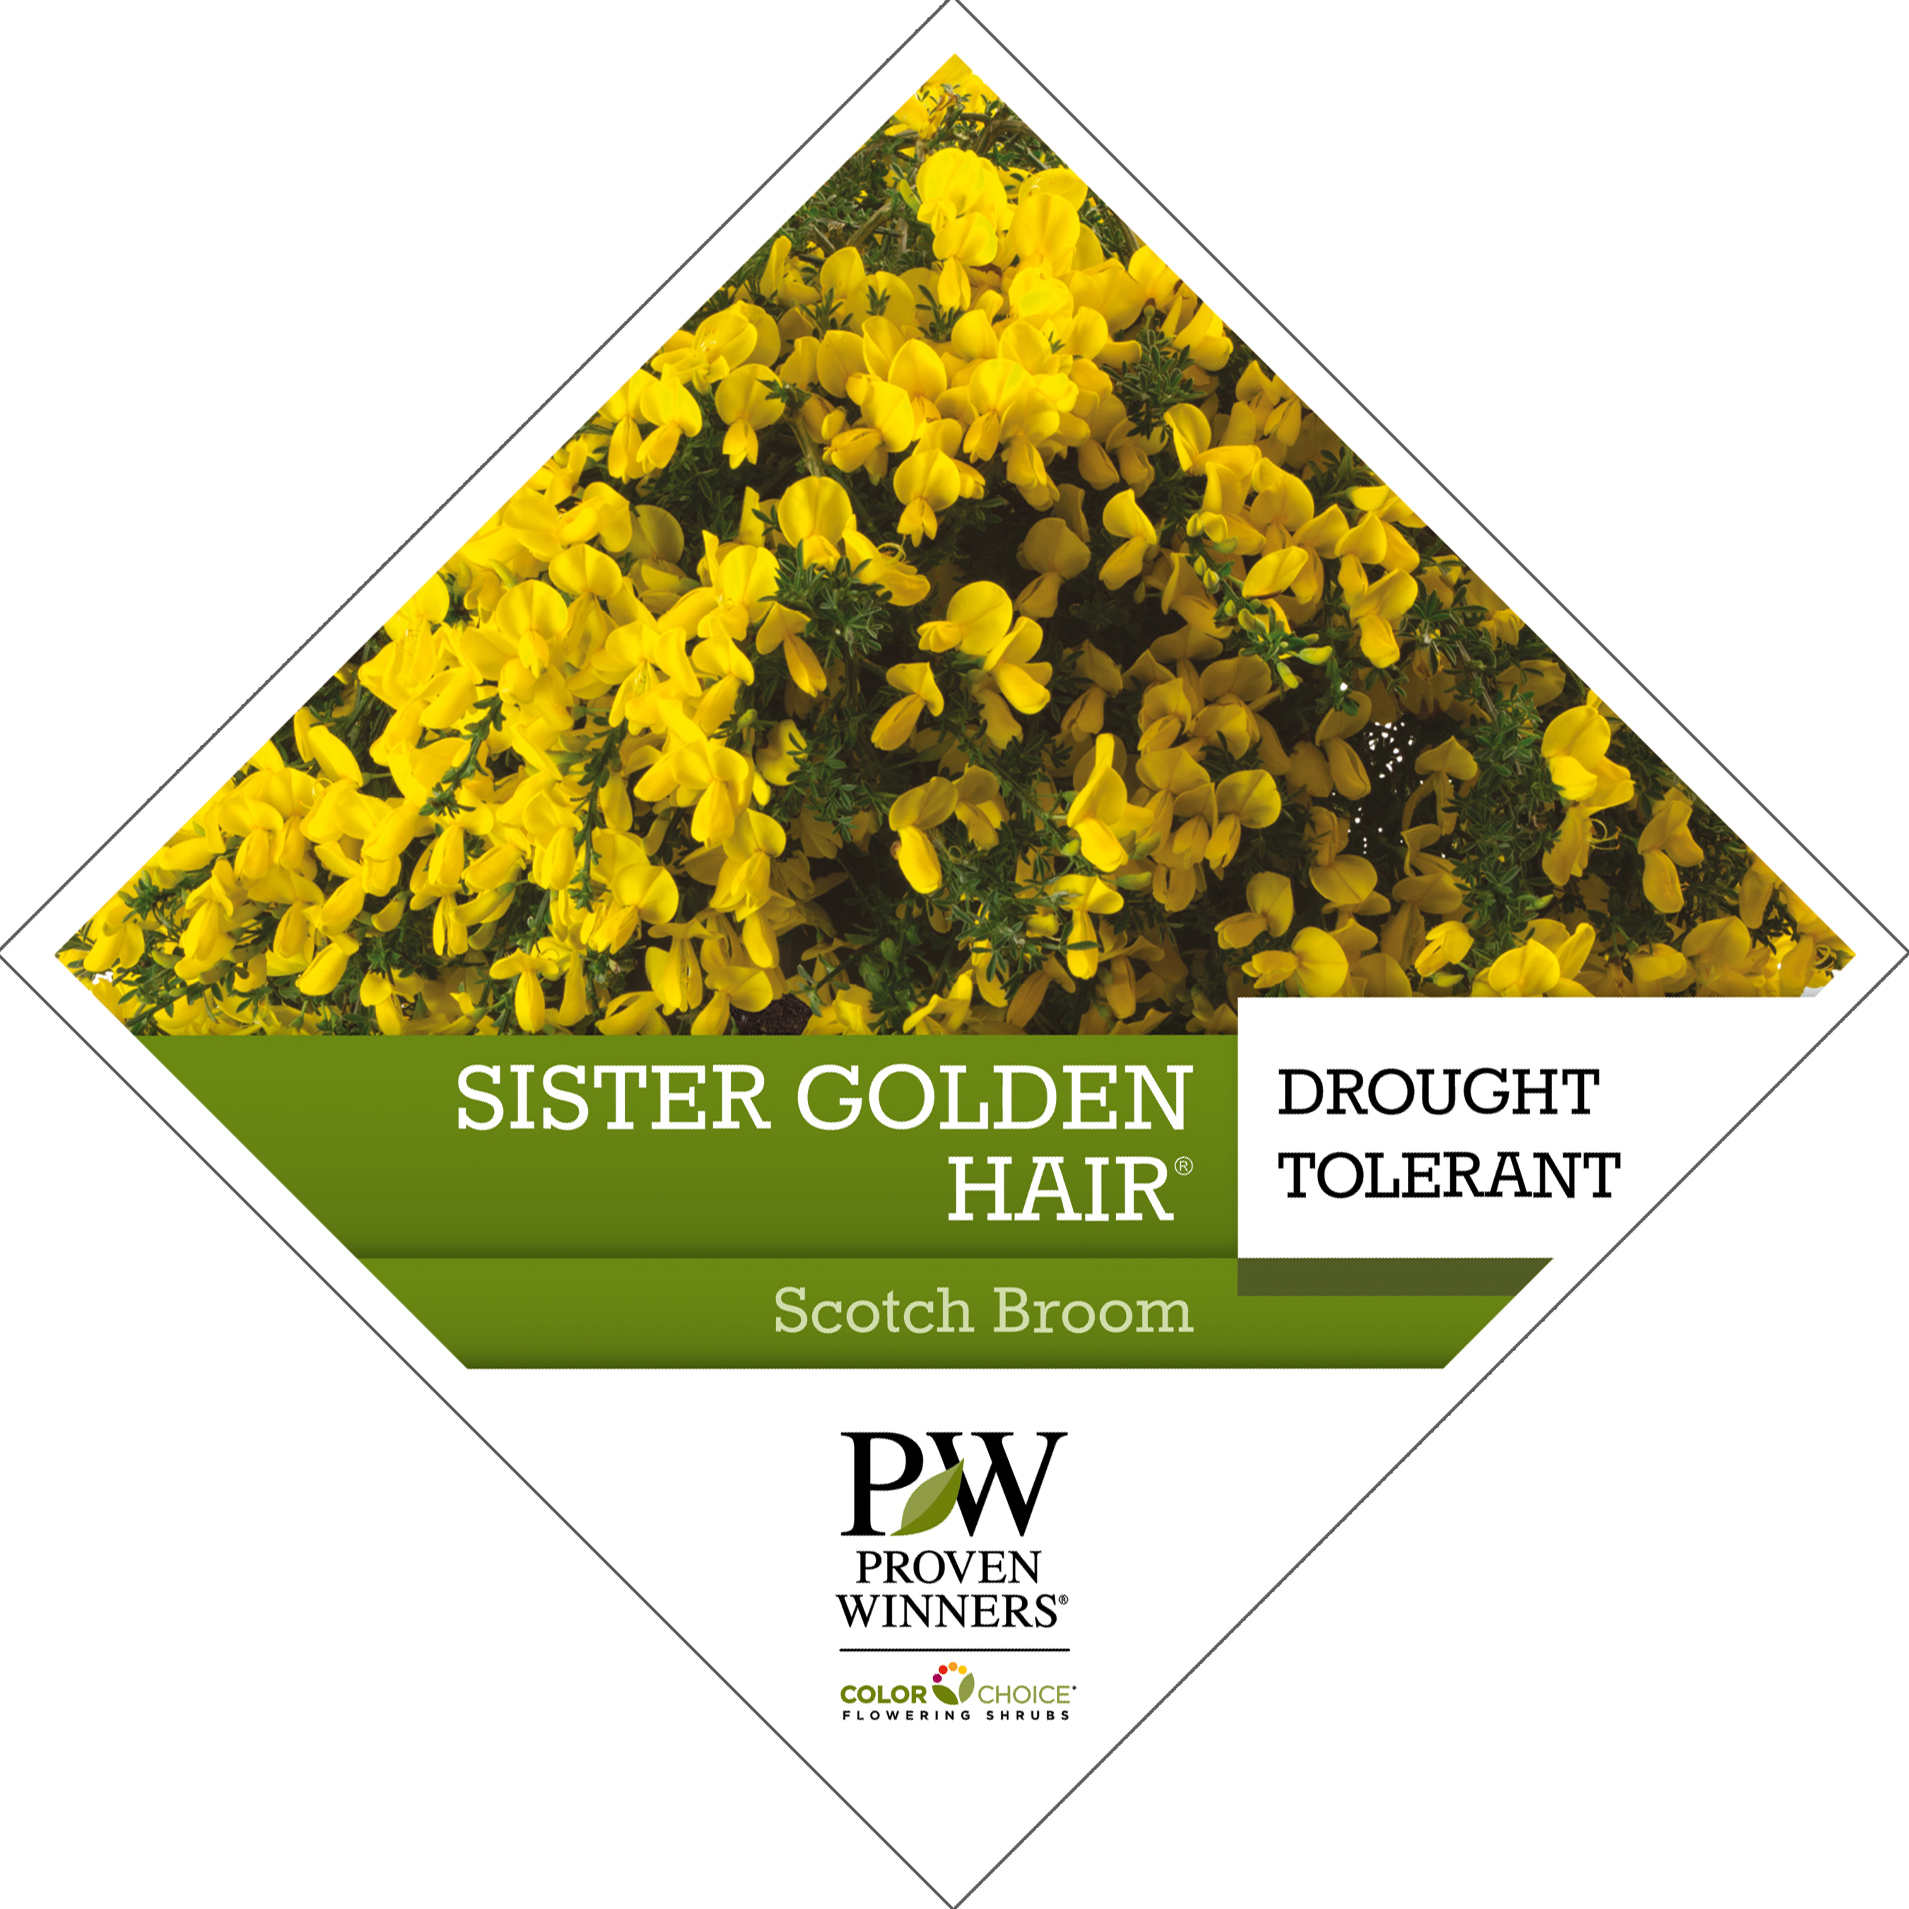 Preview of Sister Golden Hair® Cytisus PDF